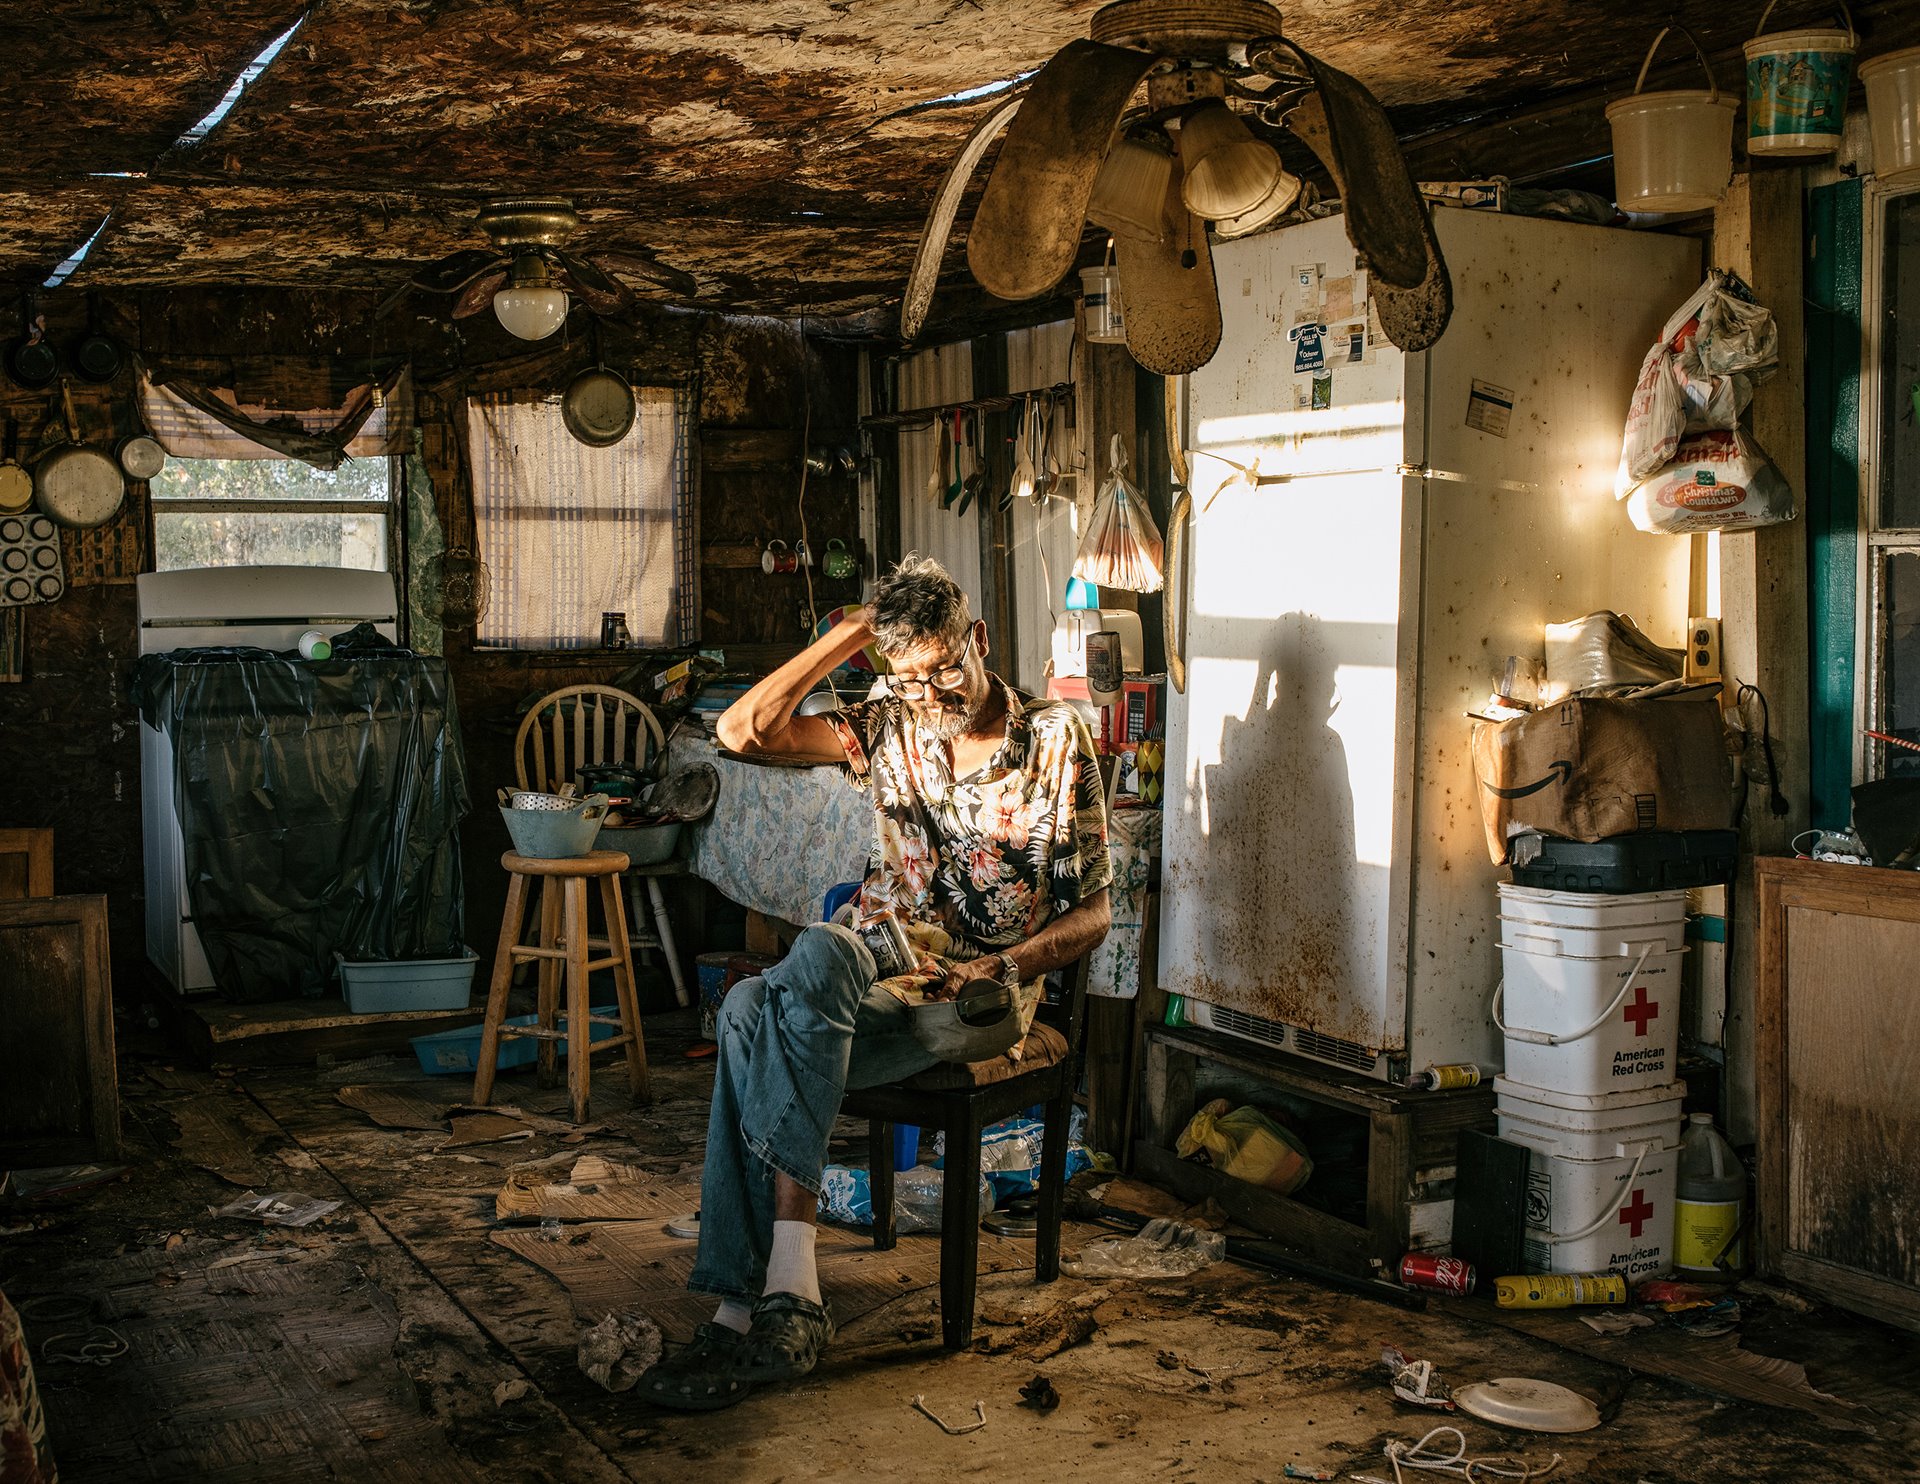 Out of habit, Roger Naquin still spends afternoons in Uncle Freddy&rsquo;s house, which has been infested with mold since Hurricane Ida. Roger and Freddy Naquin live in caravans in nearby Pointe-aux-Chênes on the mainland and are not eligible for relocation funds. Pointe-aux-Chênes, Louisiana, United States.